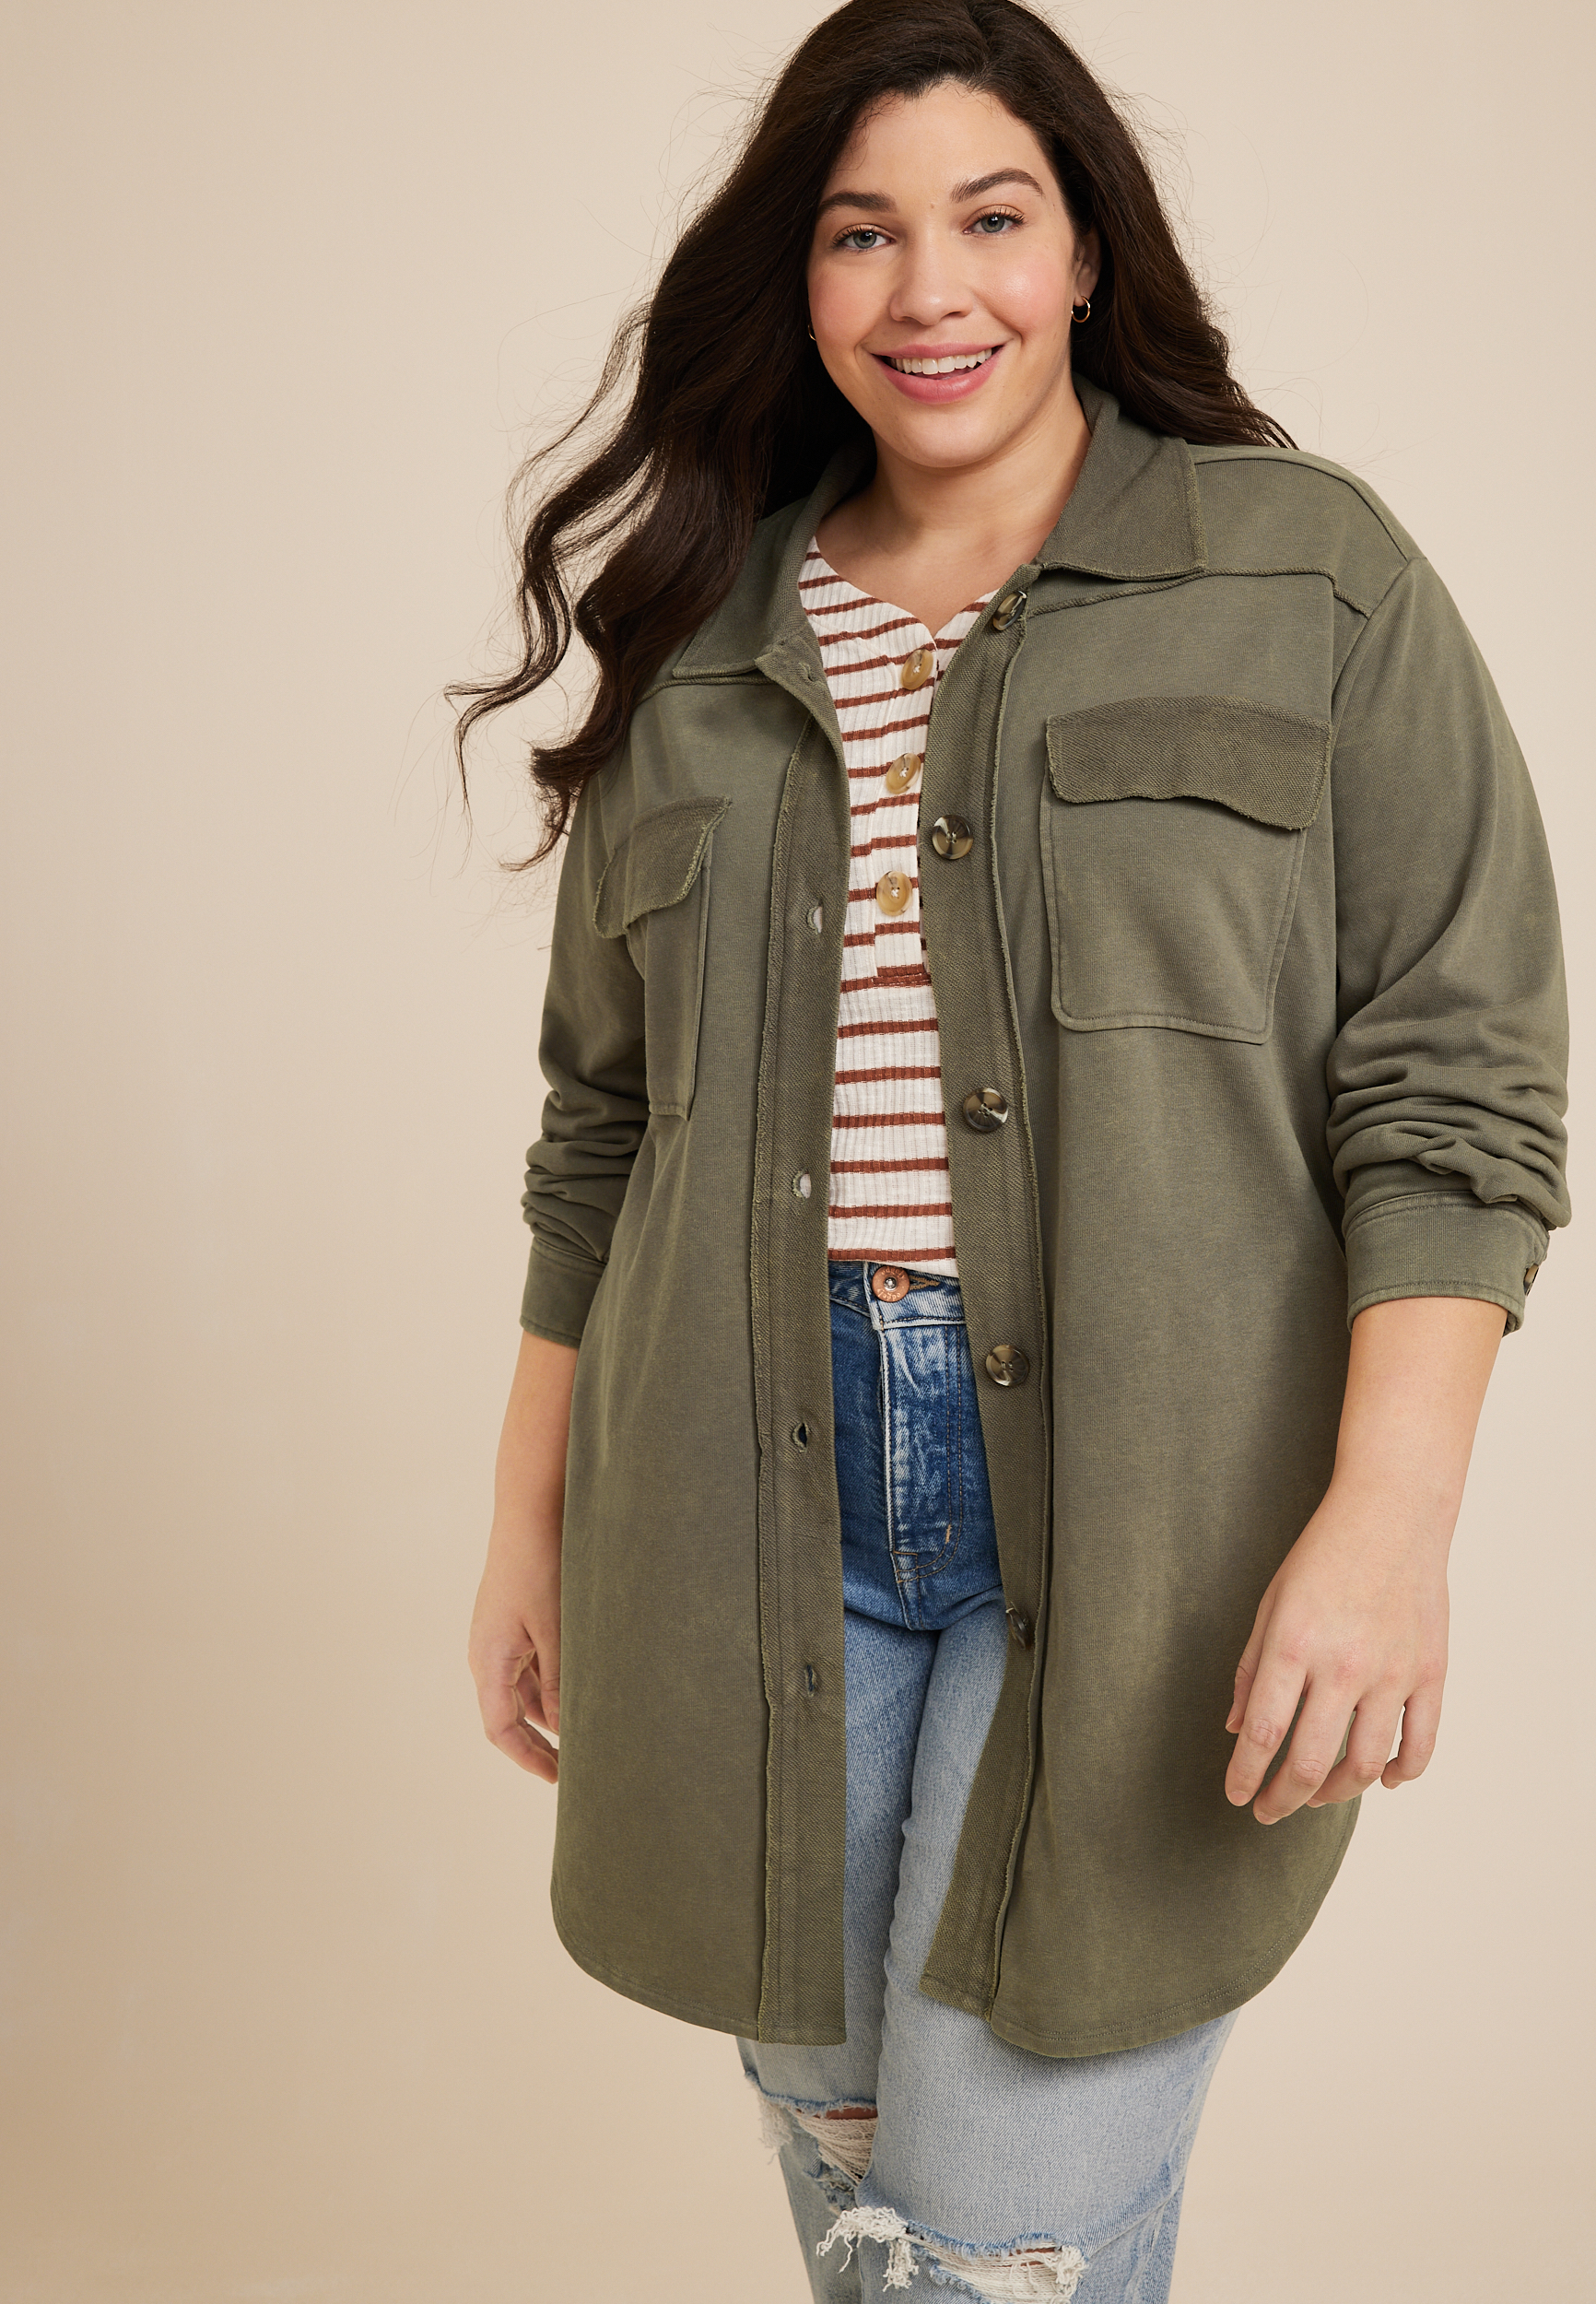 New Arrival Jackets & Vests For Women | maurices